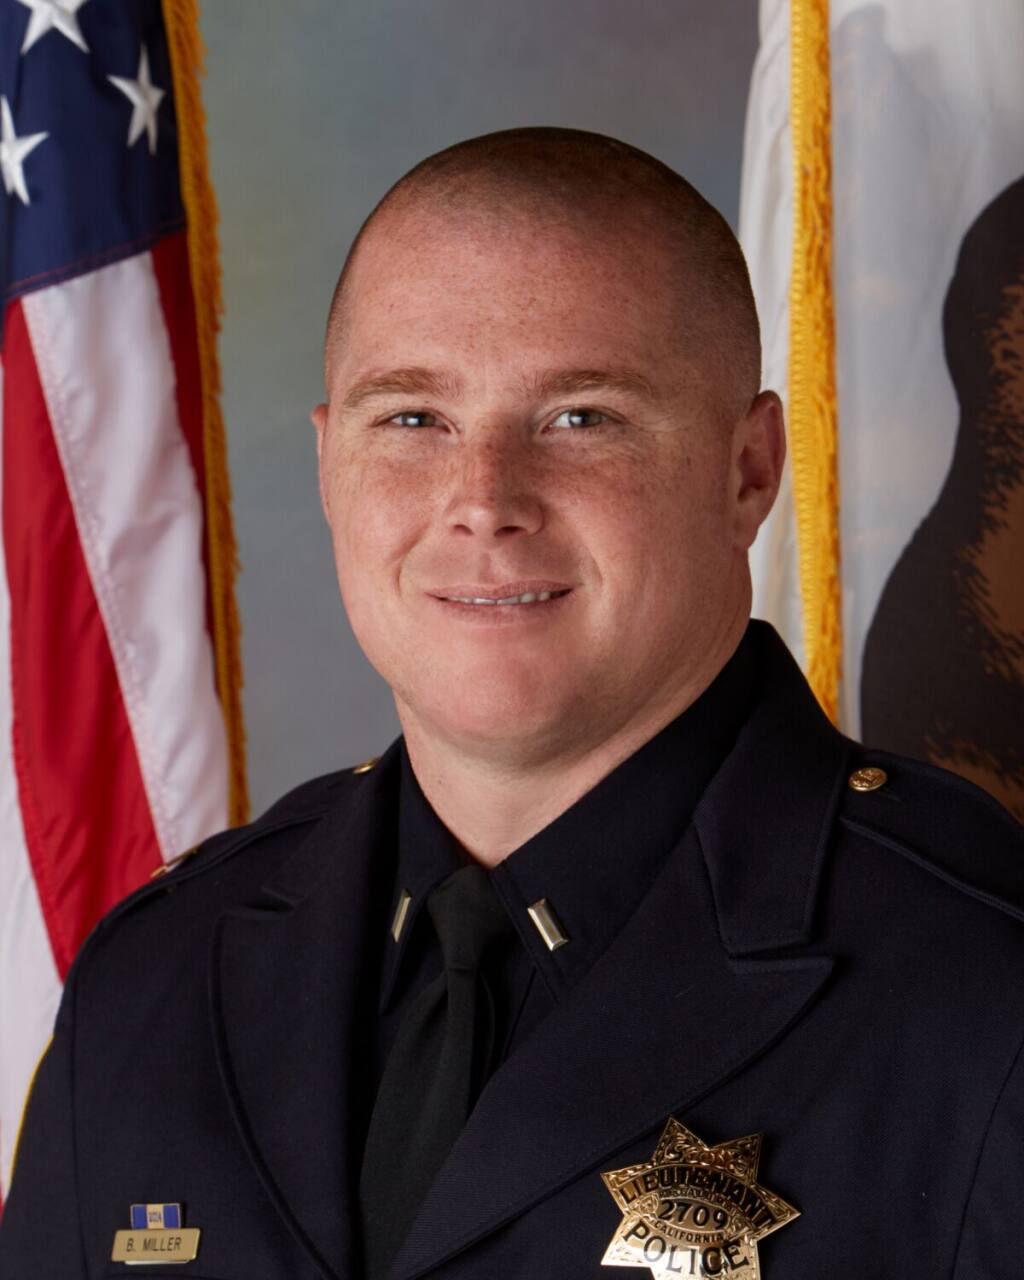 Deputy Police Chief Brian Miller, who takes over the position from retiring officer Tara Salizzoni, has been with the Petaluma Police Department for 15 years. (PETALUMA POLICE DEPARTMENT).